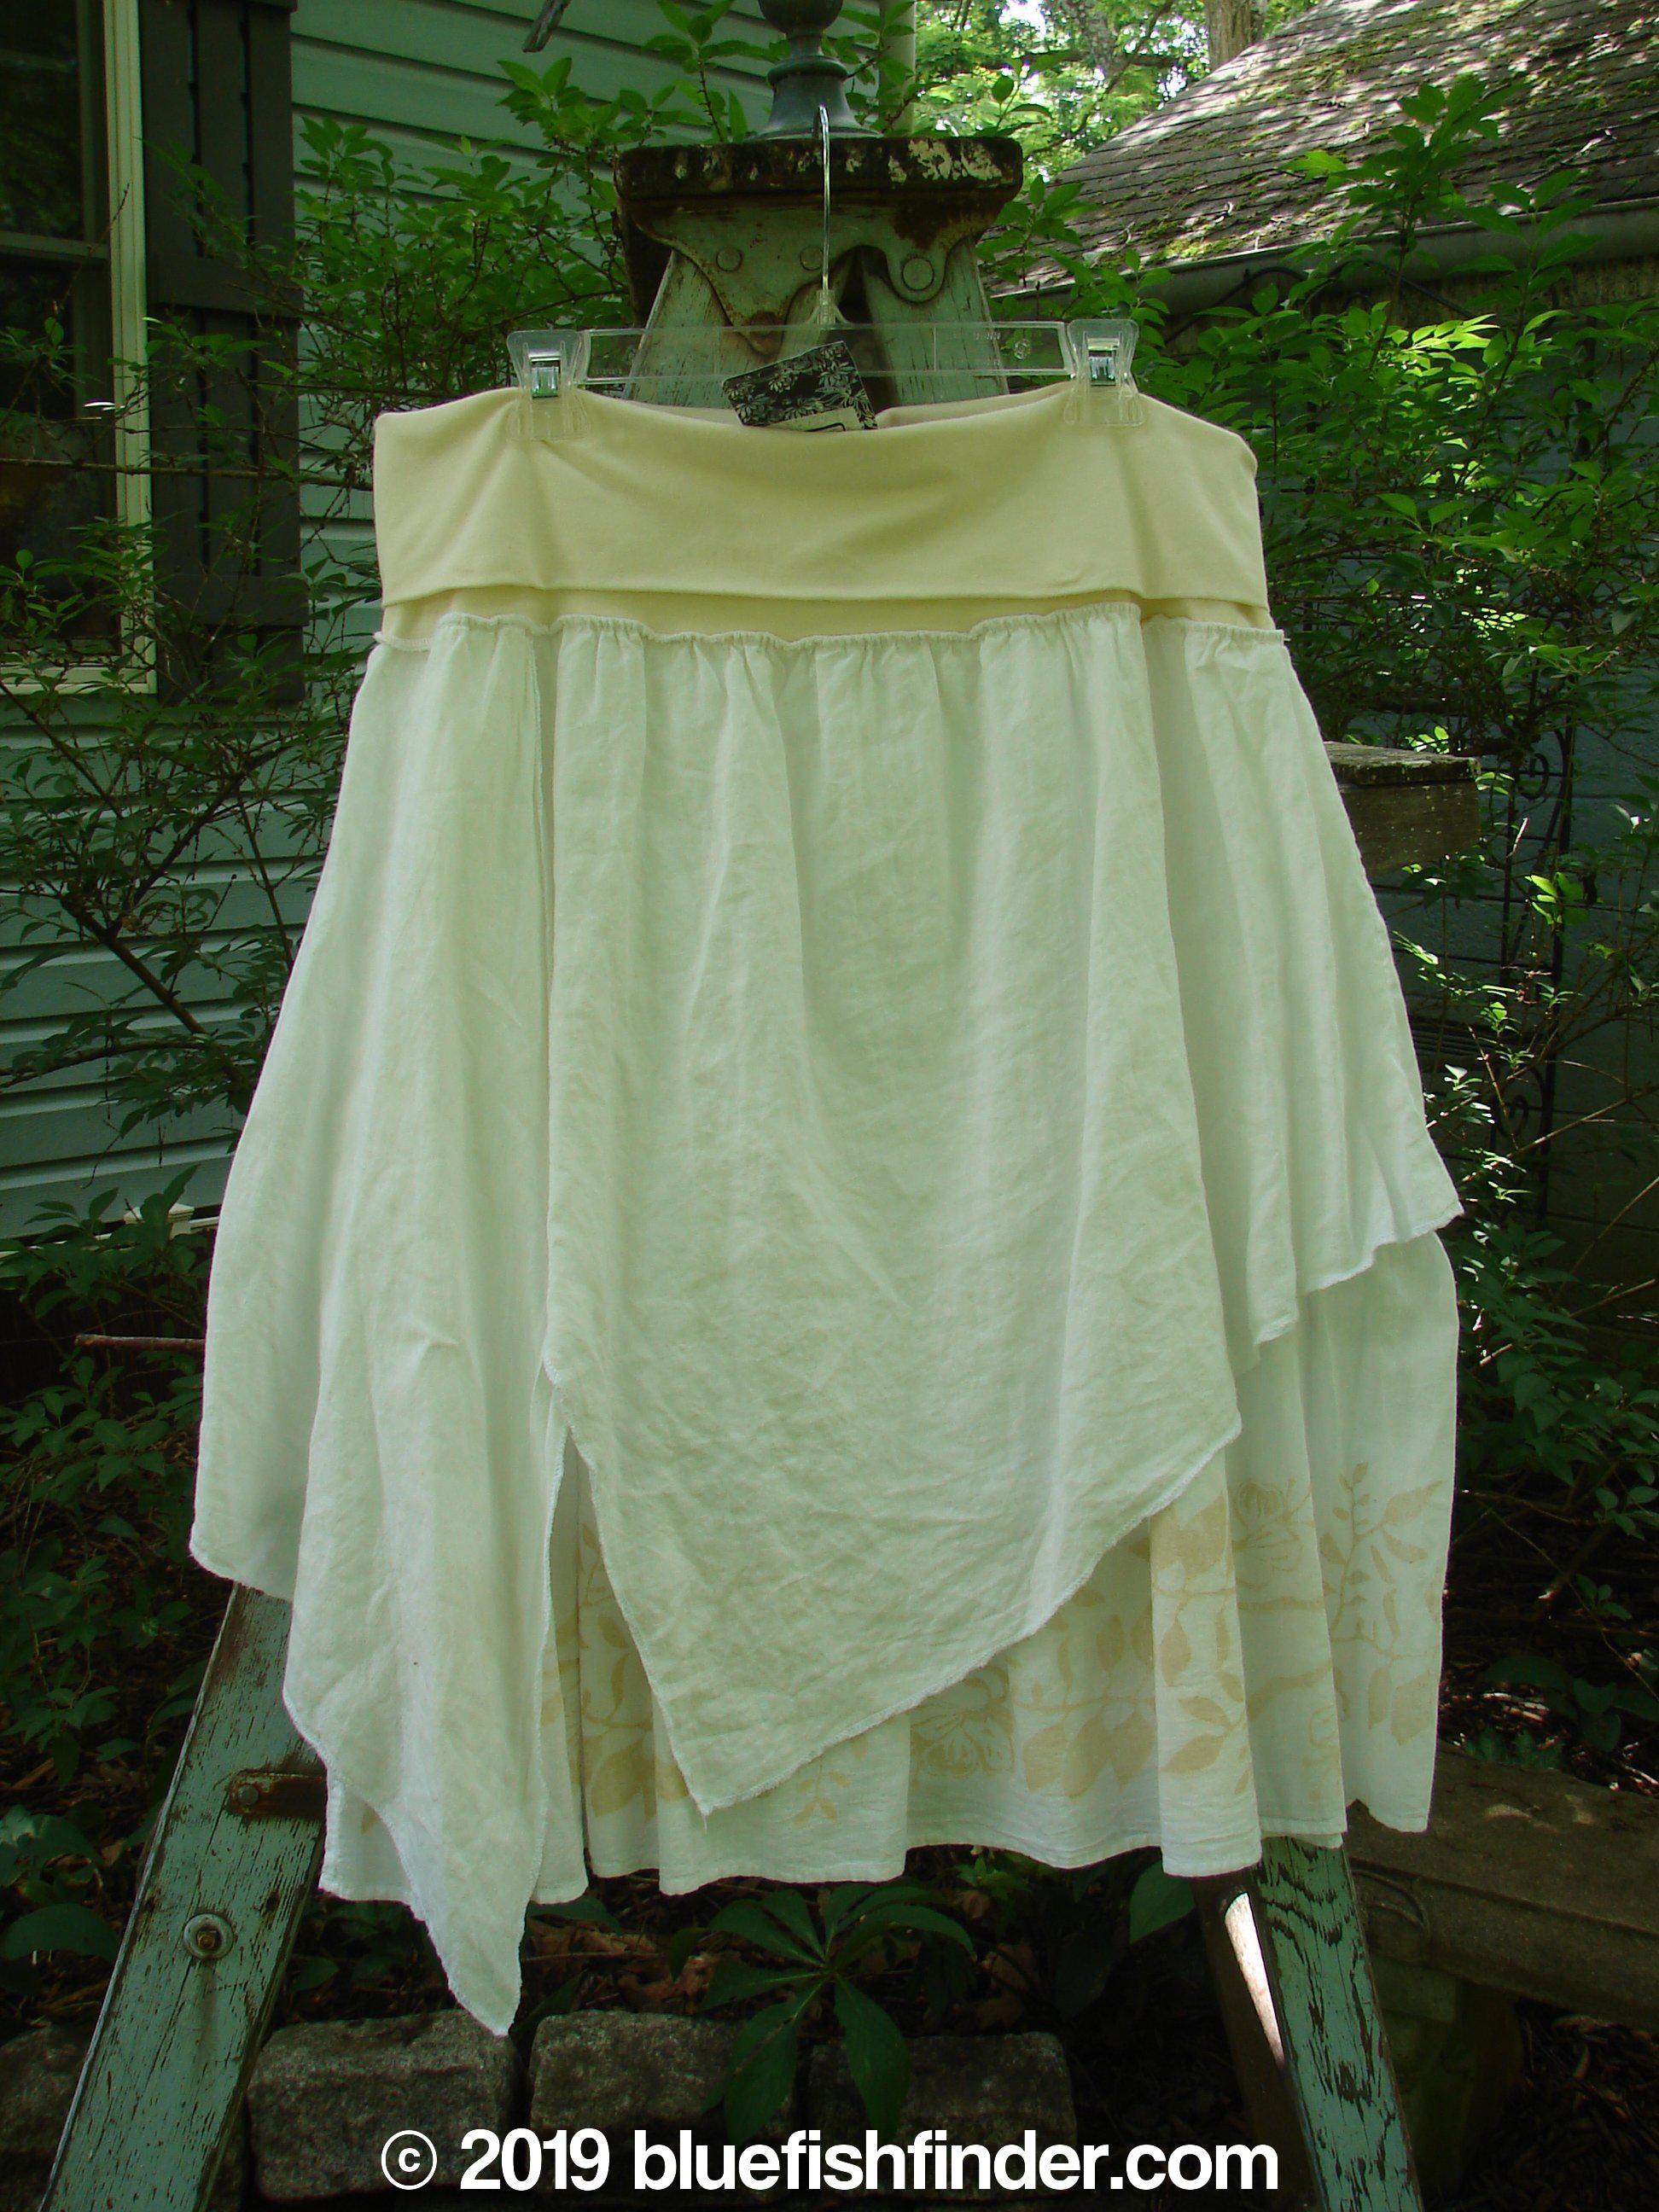 A white skirt with a wider, boxier crop shape and length, featuring a three-button front and three-quarter length cotton sleeves. The skirt has a full cotton paneled waistline with an outer layer of painted batiste set on the diagonal and a sweeping batiste ruffled under layer. The skirt has a dual length and measures 30 inches in full length. This Barclay NWT Batiste Draw Midi Meadow Trio White Size 2 is made from a combination of organic cotton and batiste.